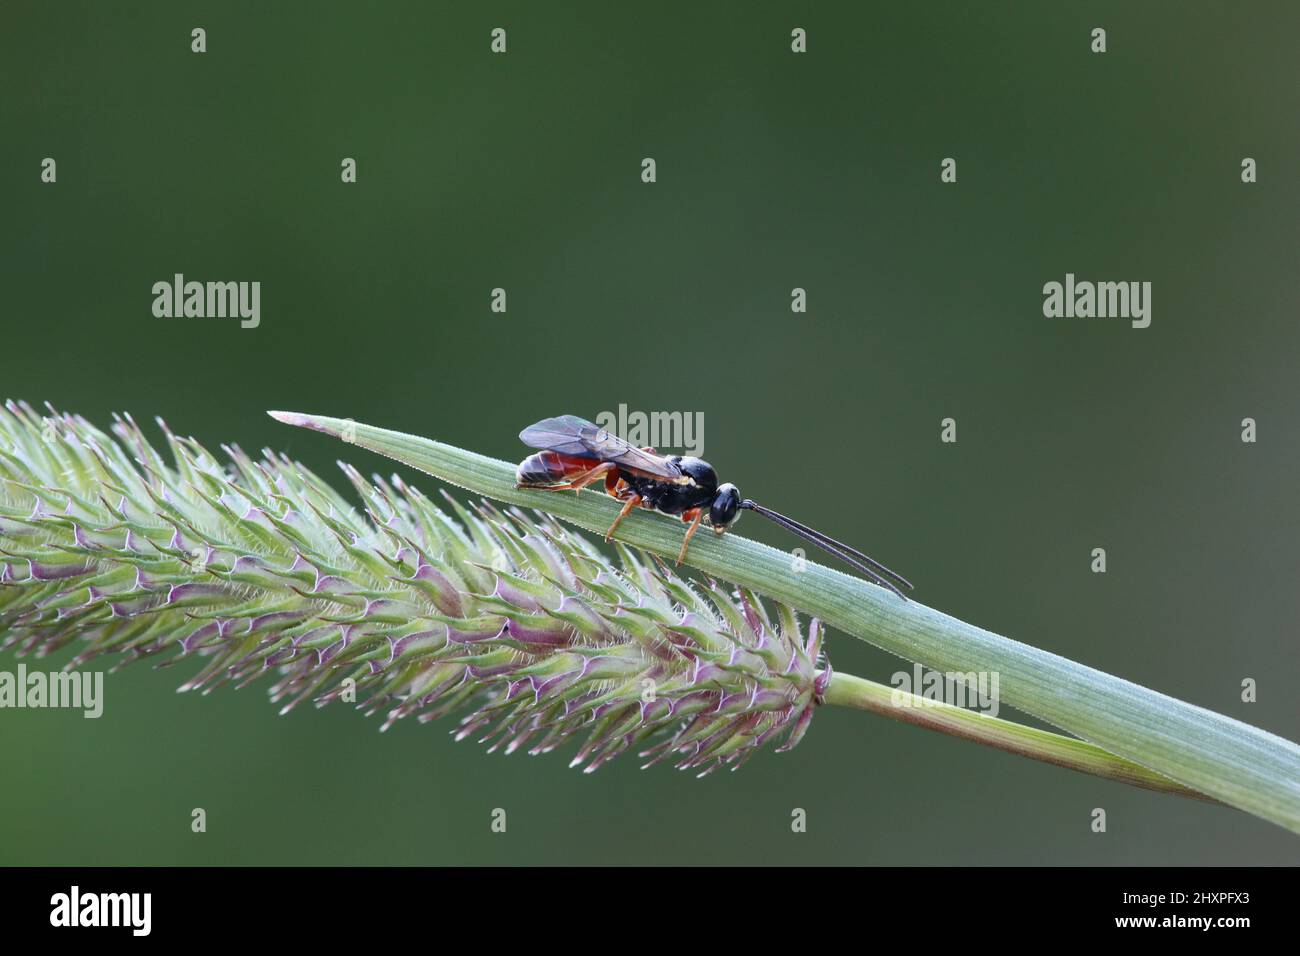 Parasitoid wasp on Timothy grass Stock Photo